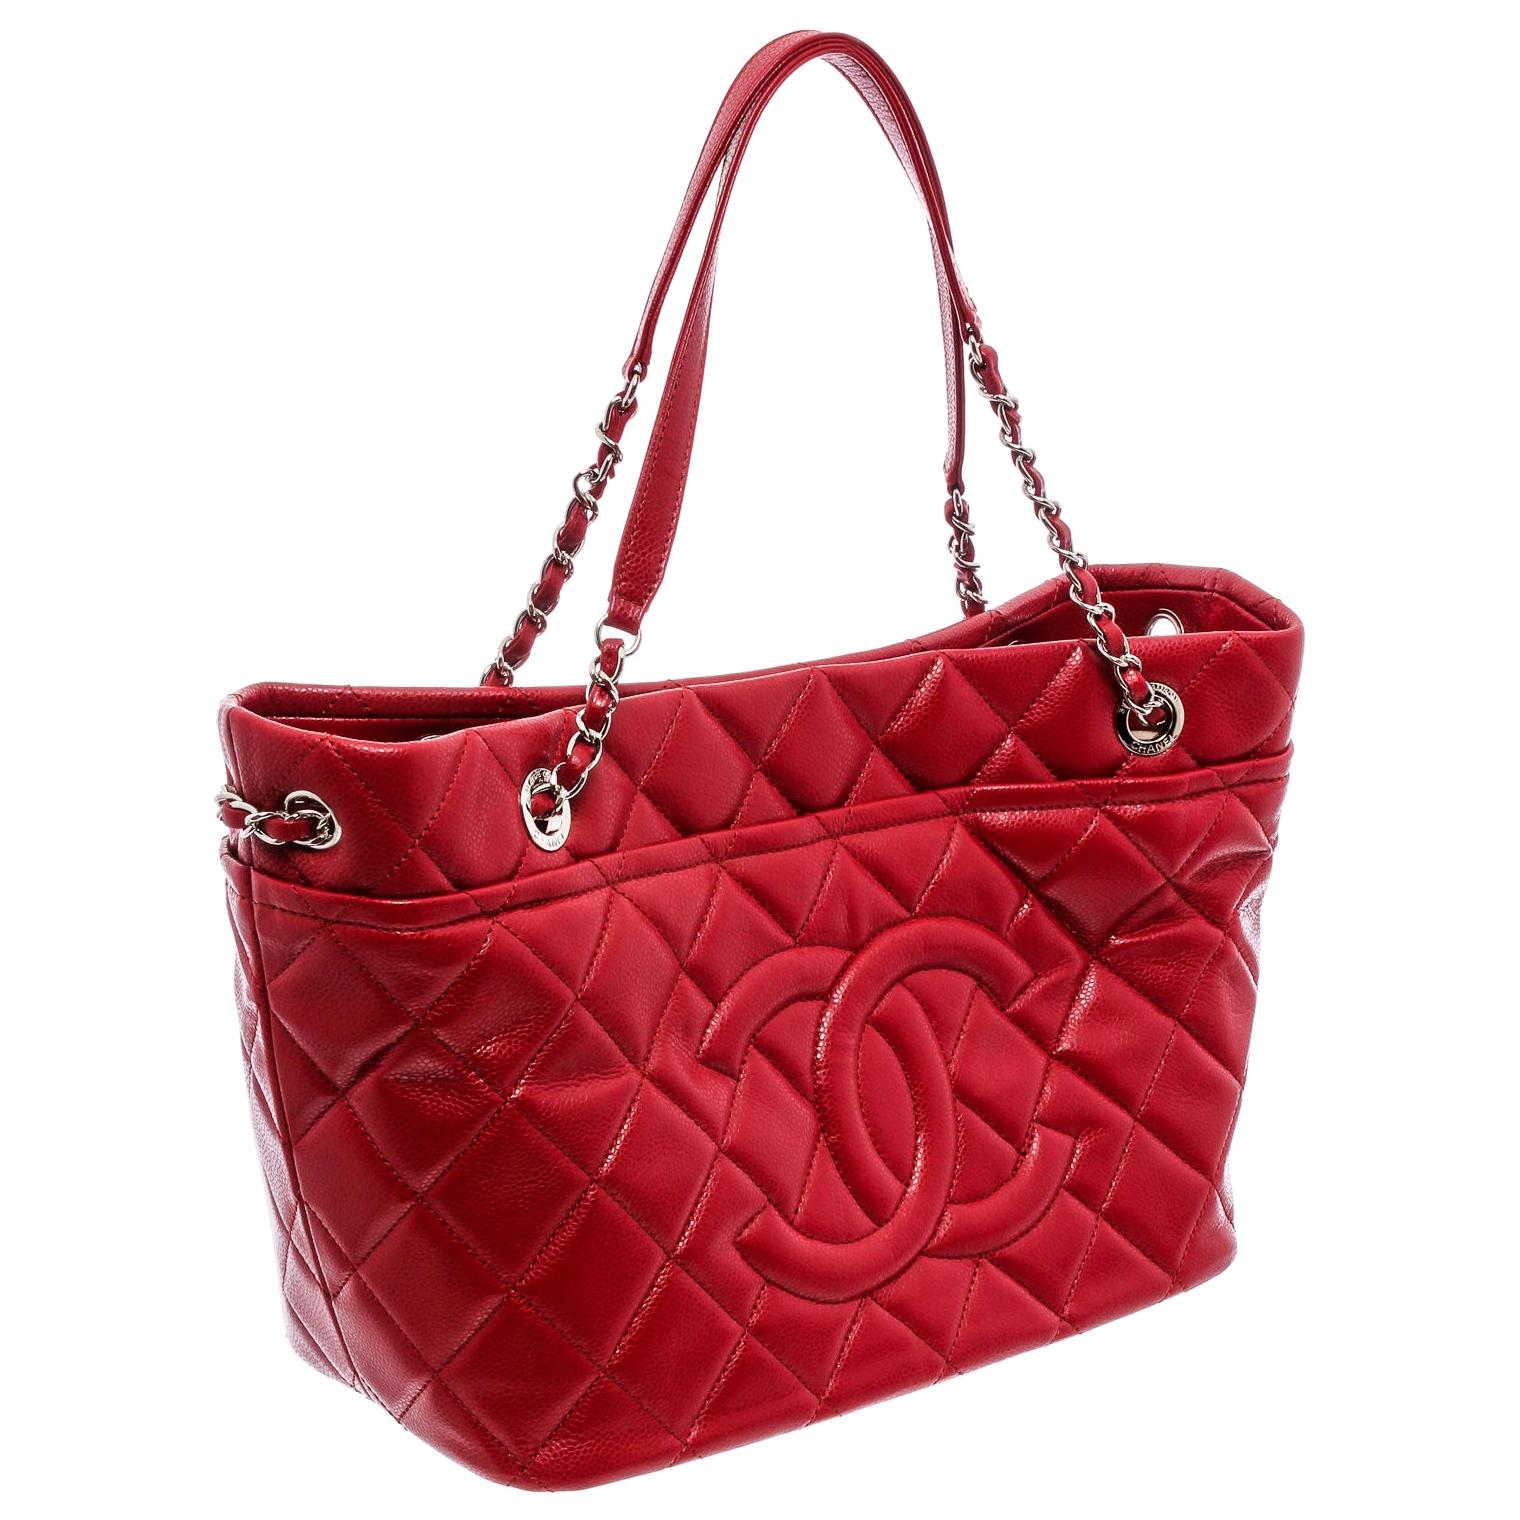 Chanel Red Caviar Leather Timeless Soft Shopper Tote Bag at